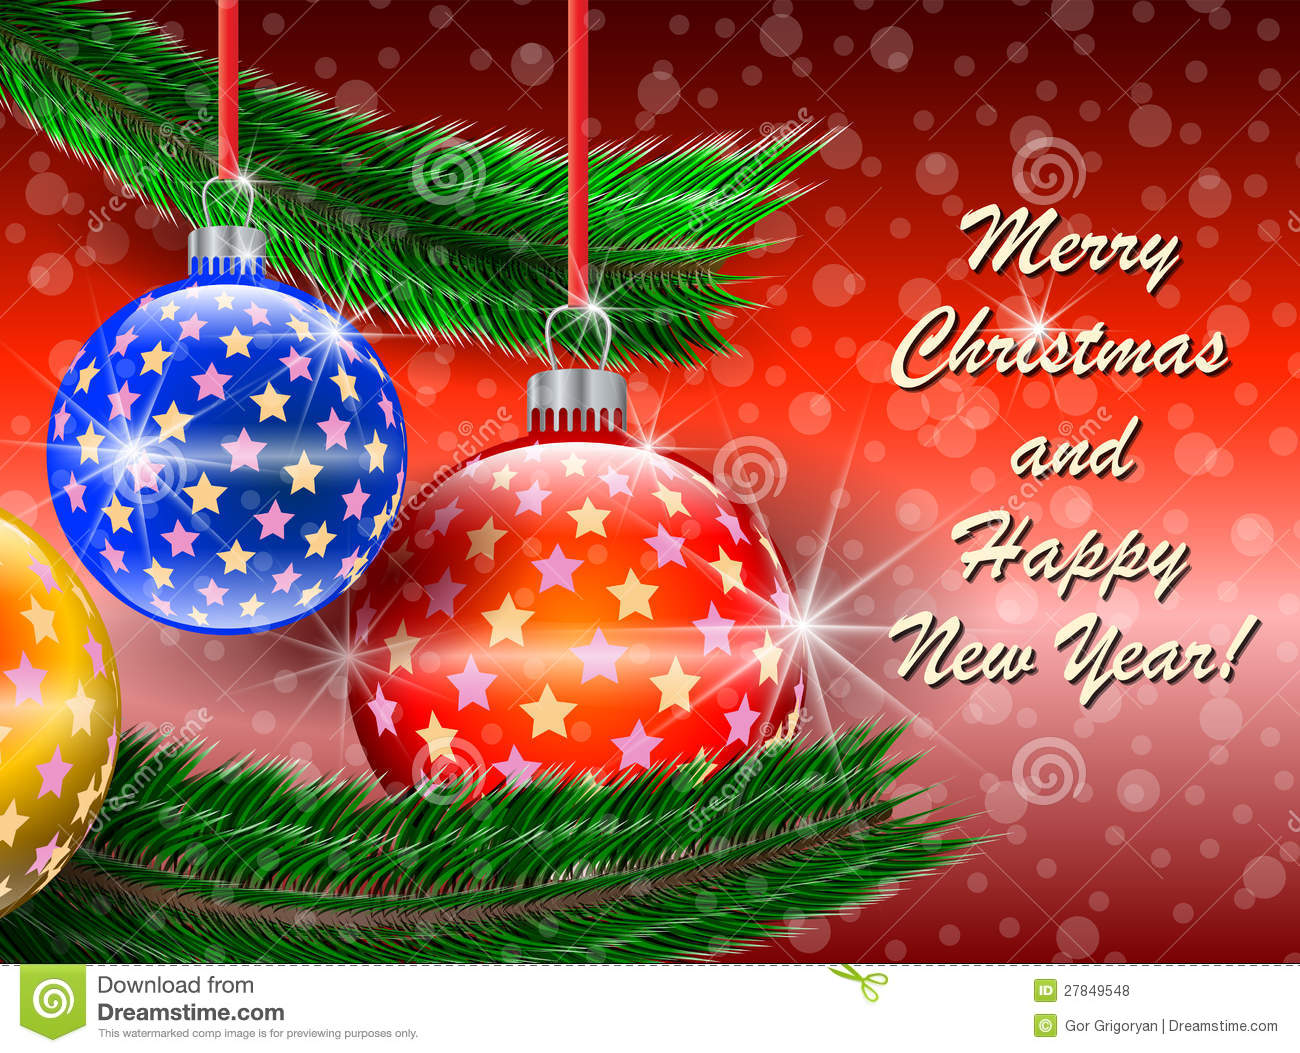 Merry Christmas And Happy New Year In French